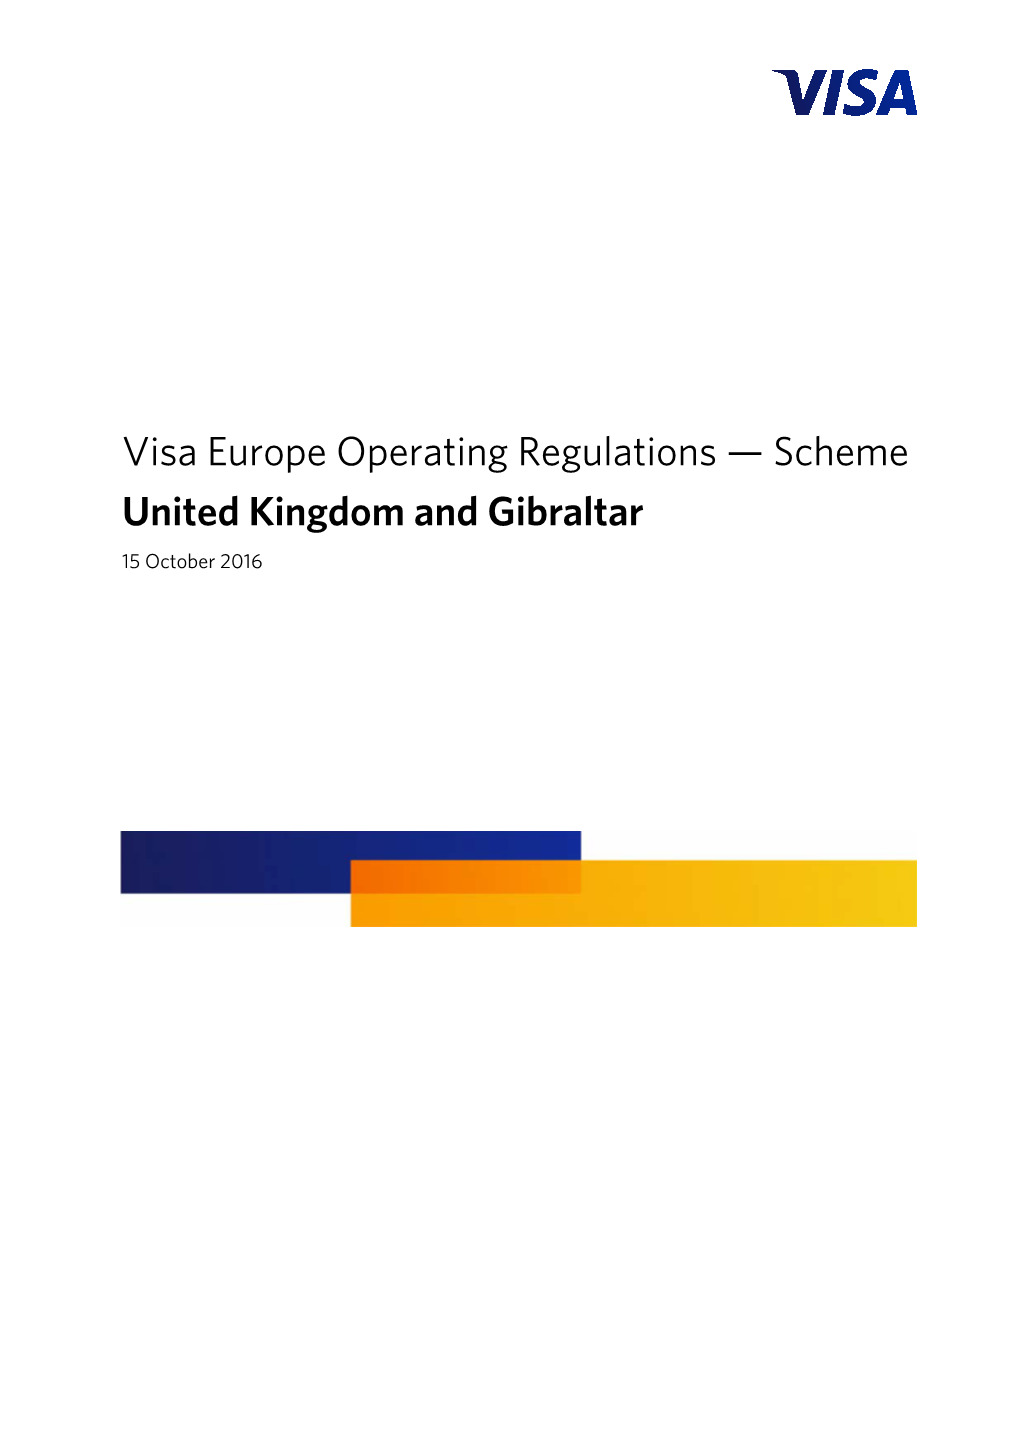 Visa Europe Operating Regulations — Scheme United Kingdom and Gibraltar 15 October 2016 THIS PAGE INTENTIONALLY LEFT BLANK Summary of Changes Summary of Changes